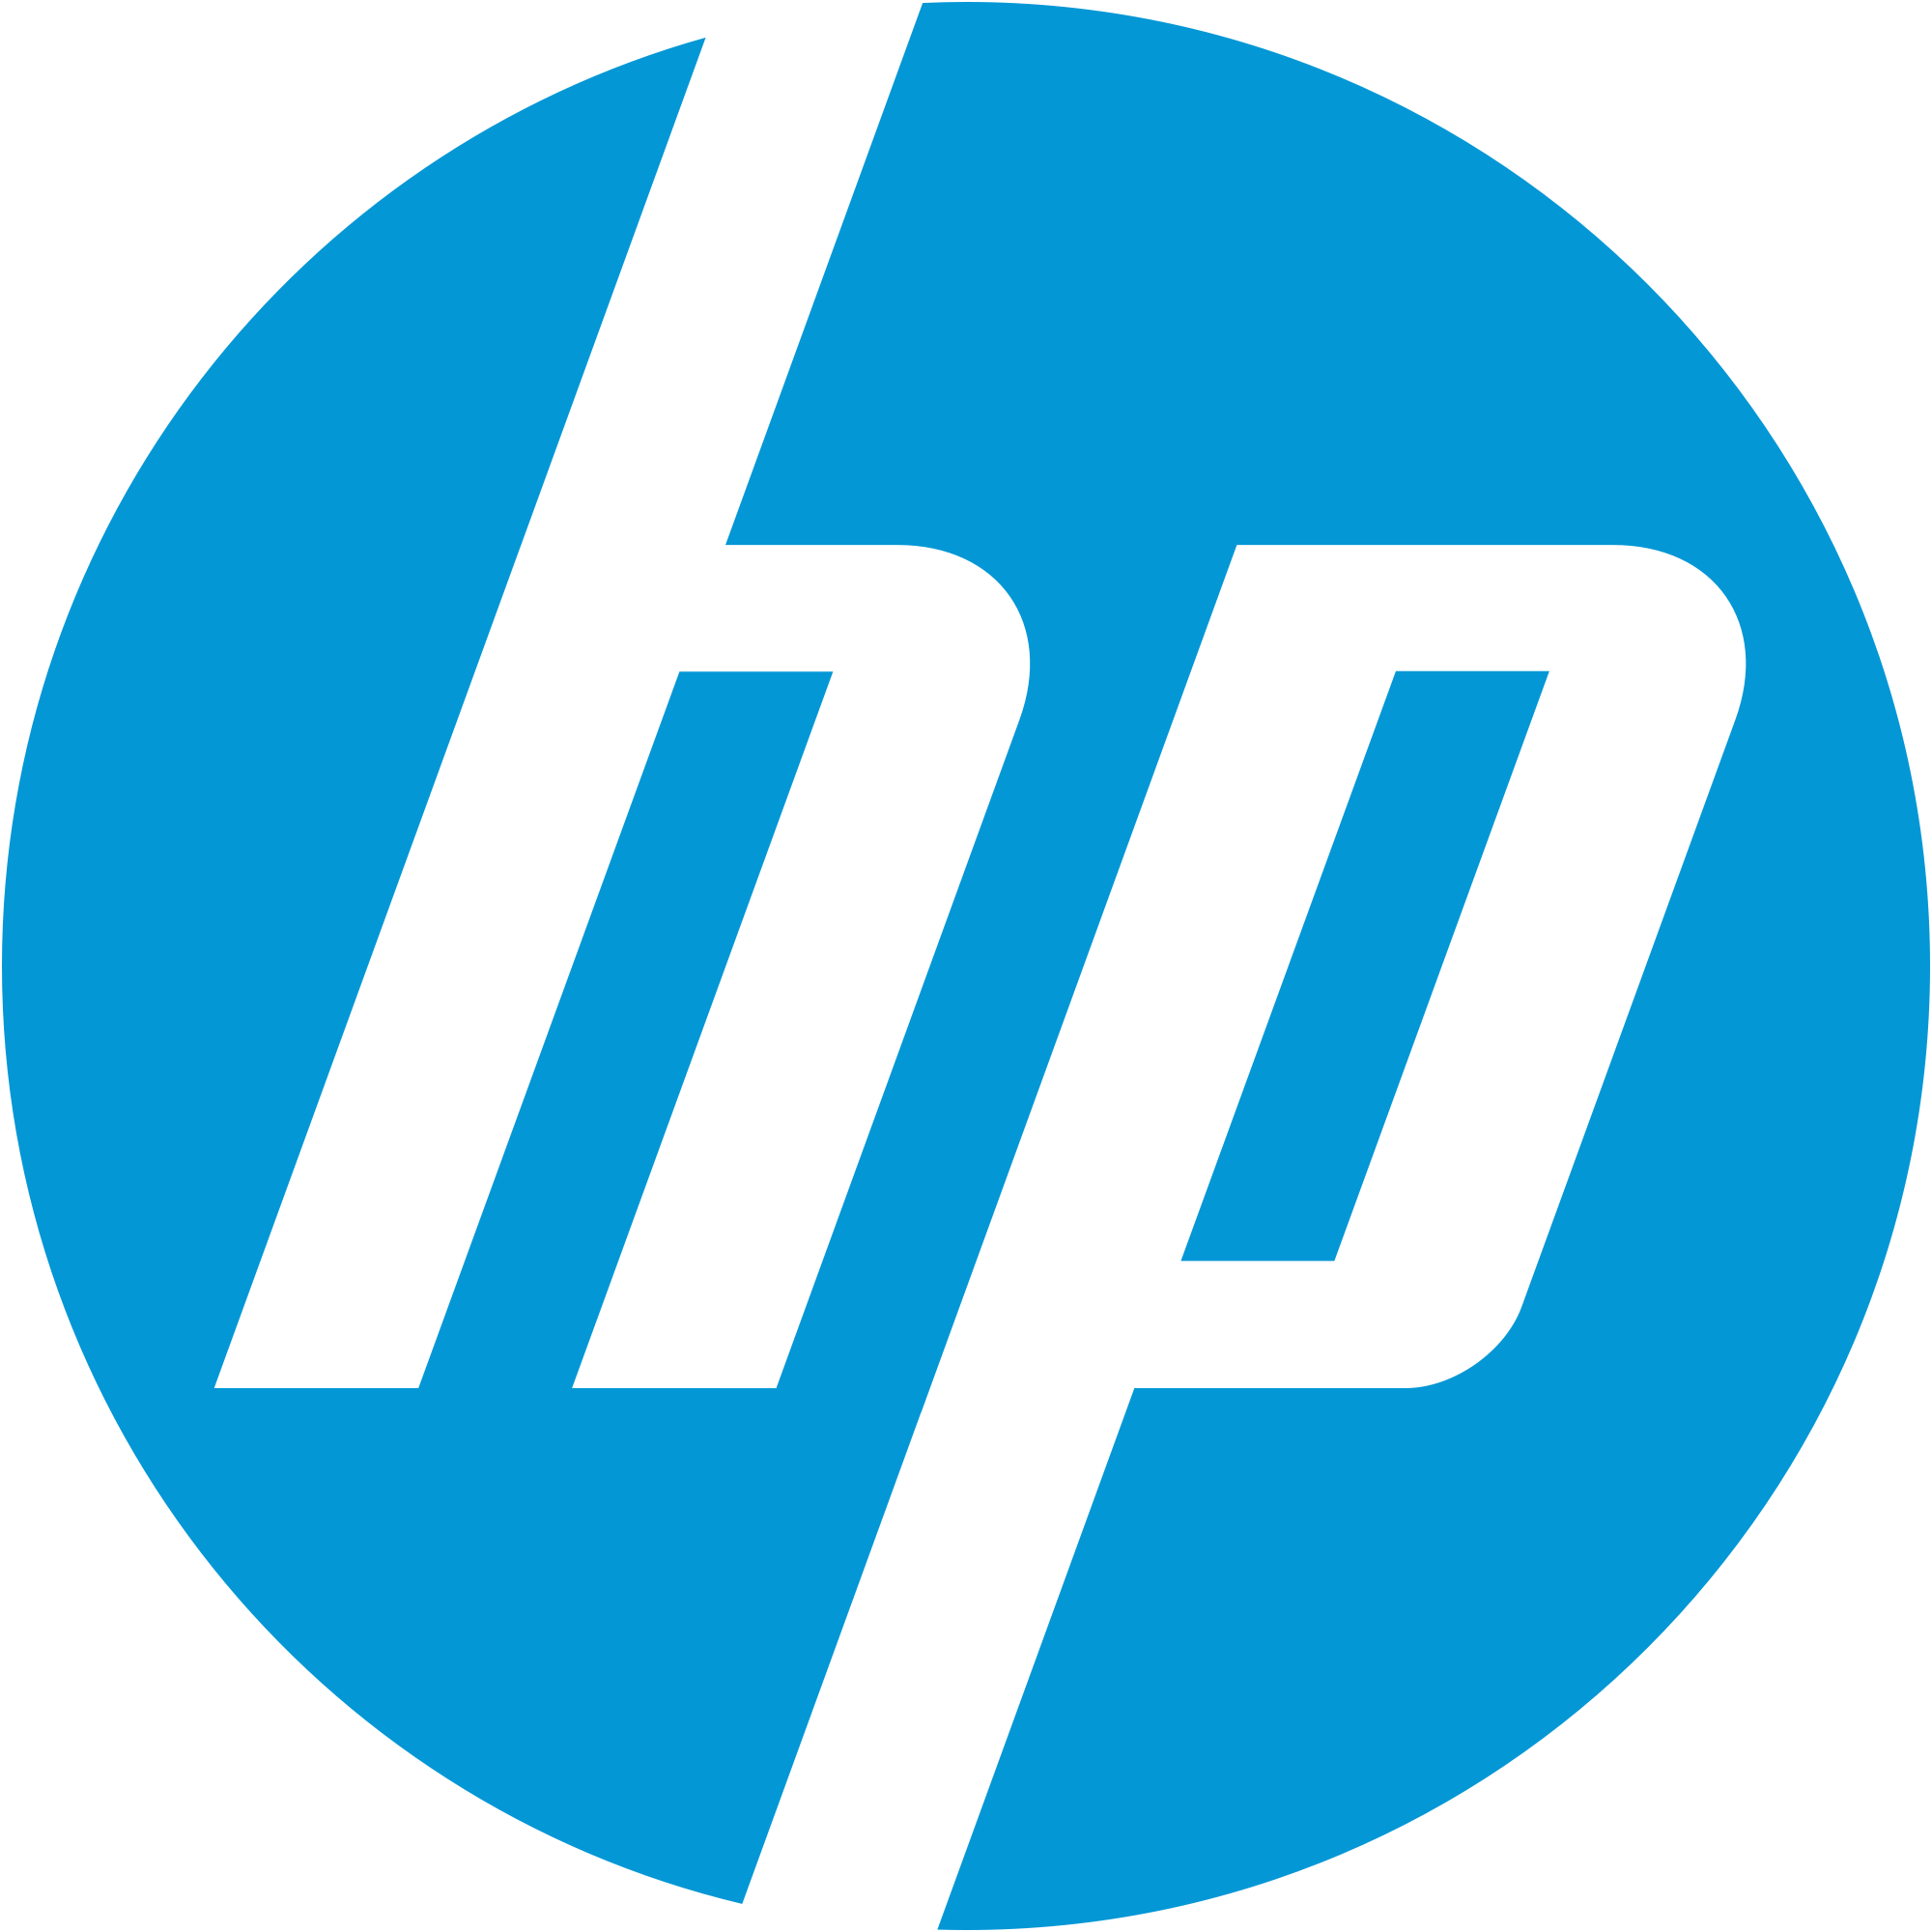 . Hdpng.com Hp Logo Transparent Background The Result Is That Our Clients Benefit From Strong, Coordinated Solutions With Partners We Know Hdpng.com  - Hp, Transparent background PNG HD thumbnail